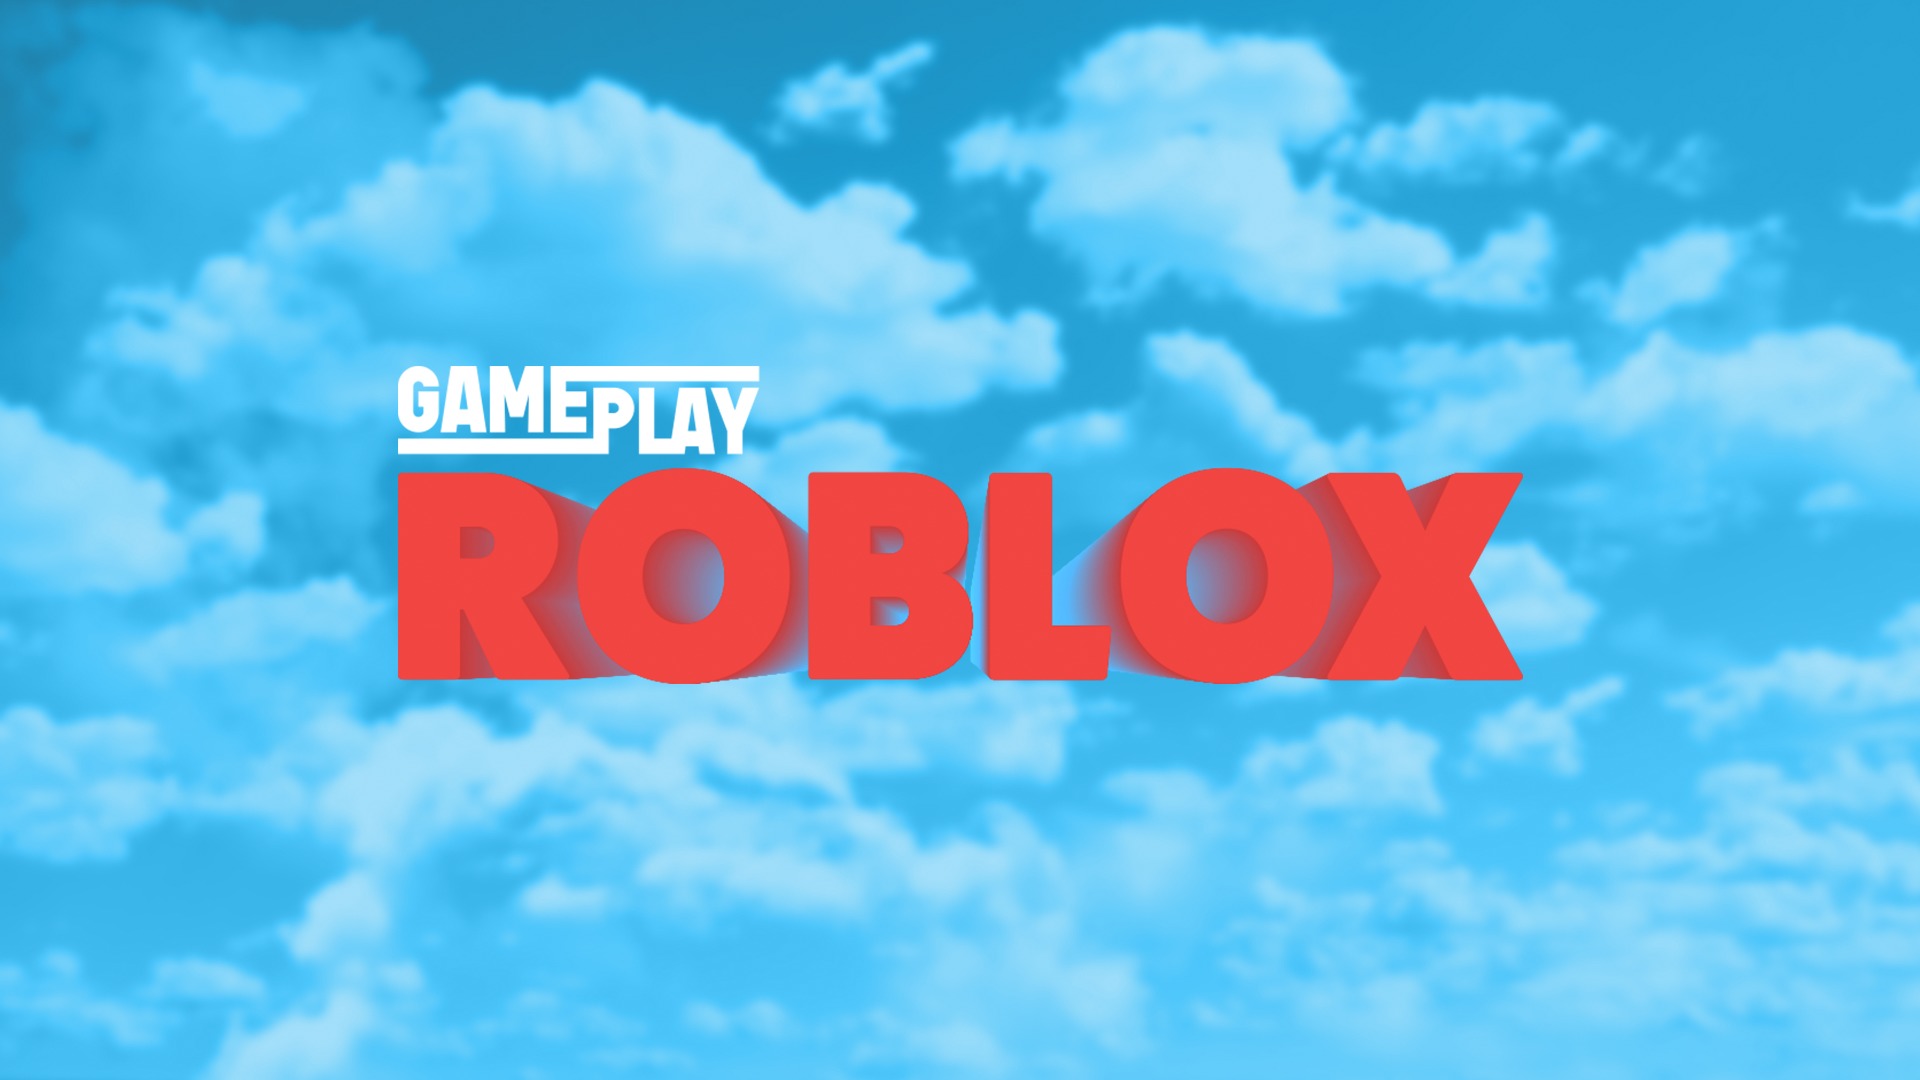 Pluto Tv Adds This Old House Roblox To Its Growing Library Of Channels Cord Cutters News - roblox xbox one x gameplay